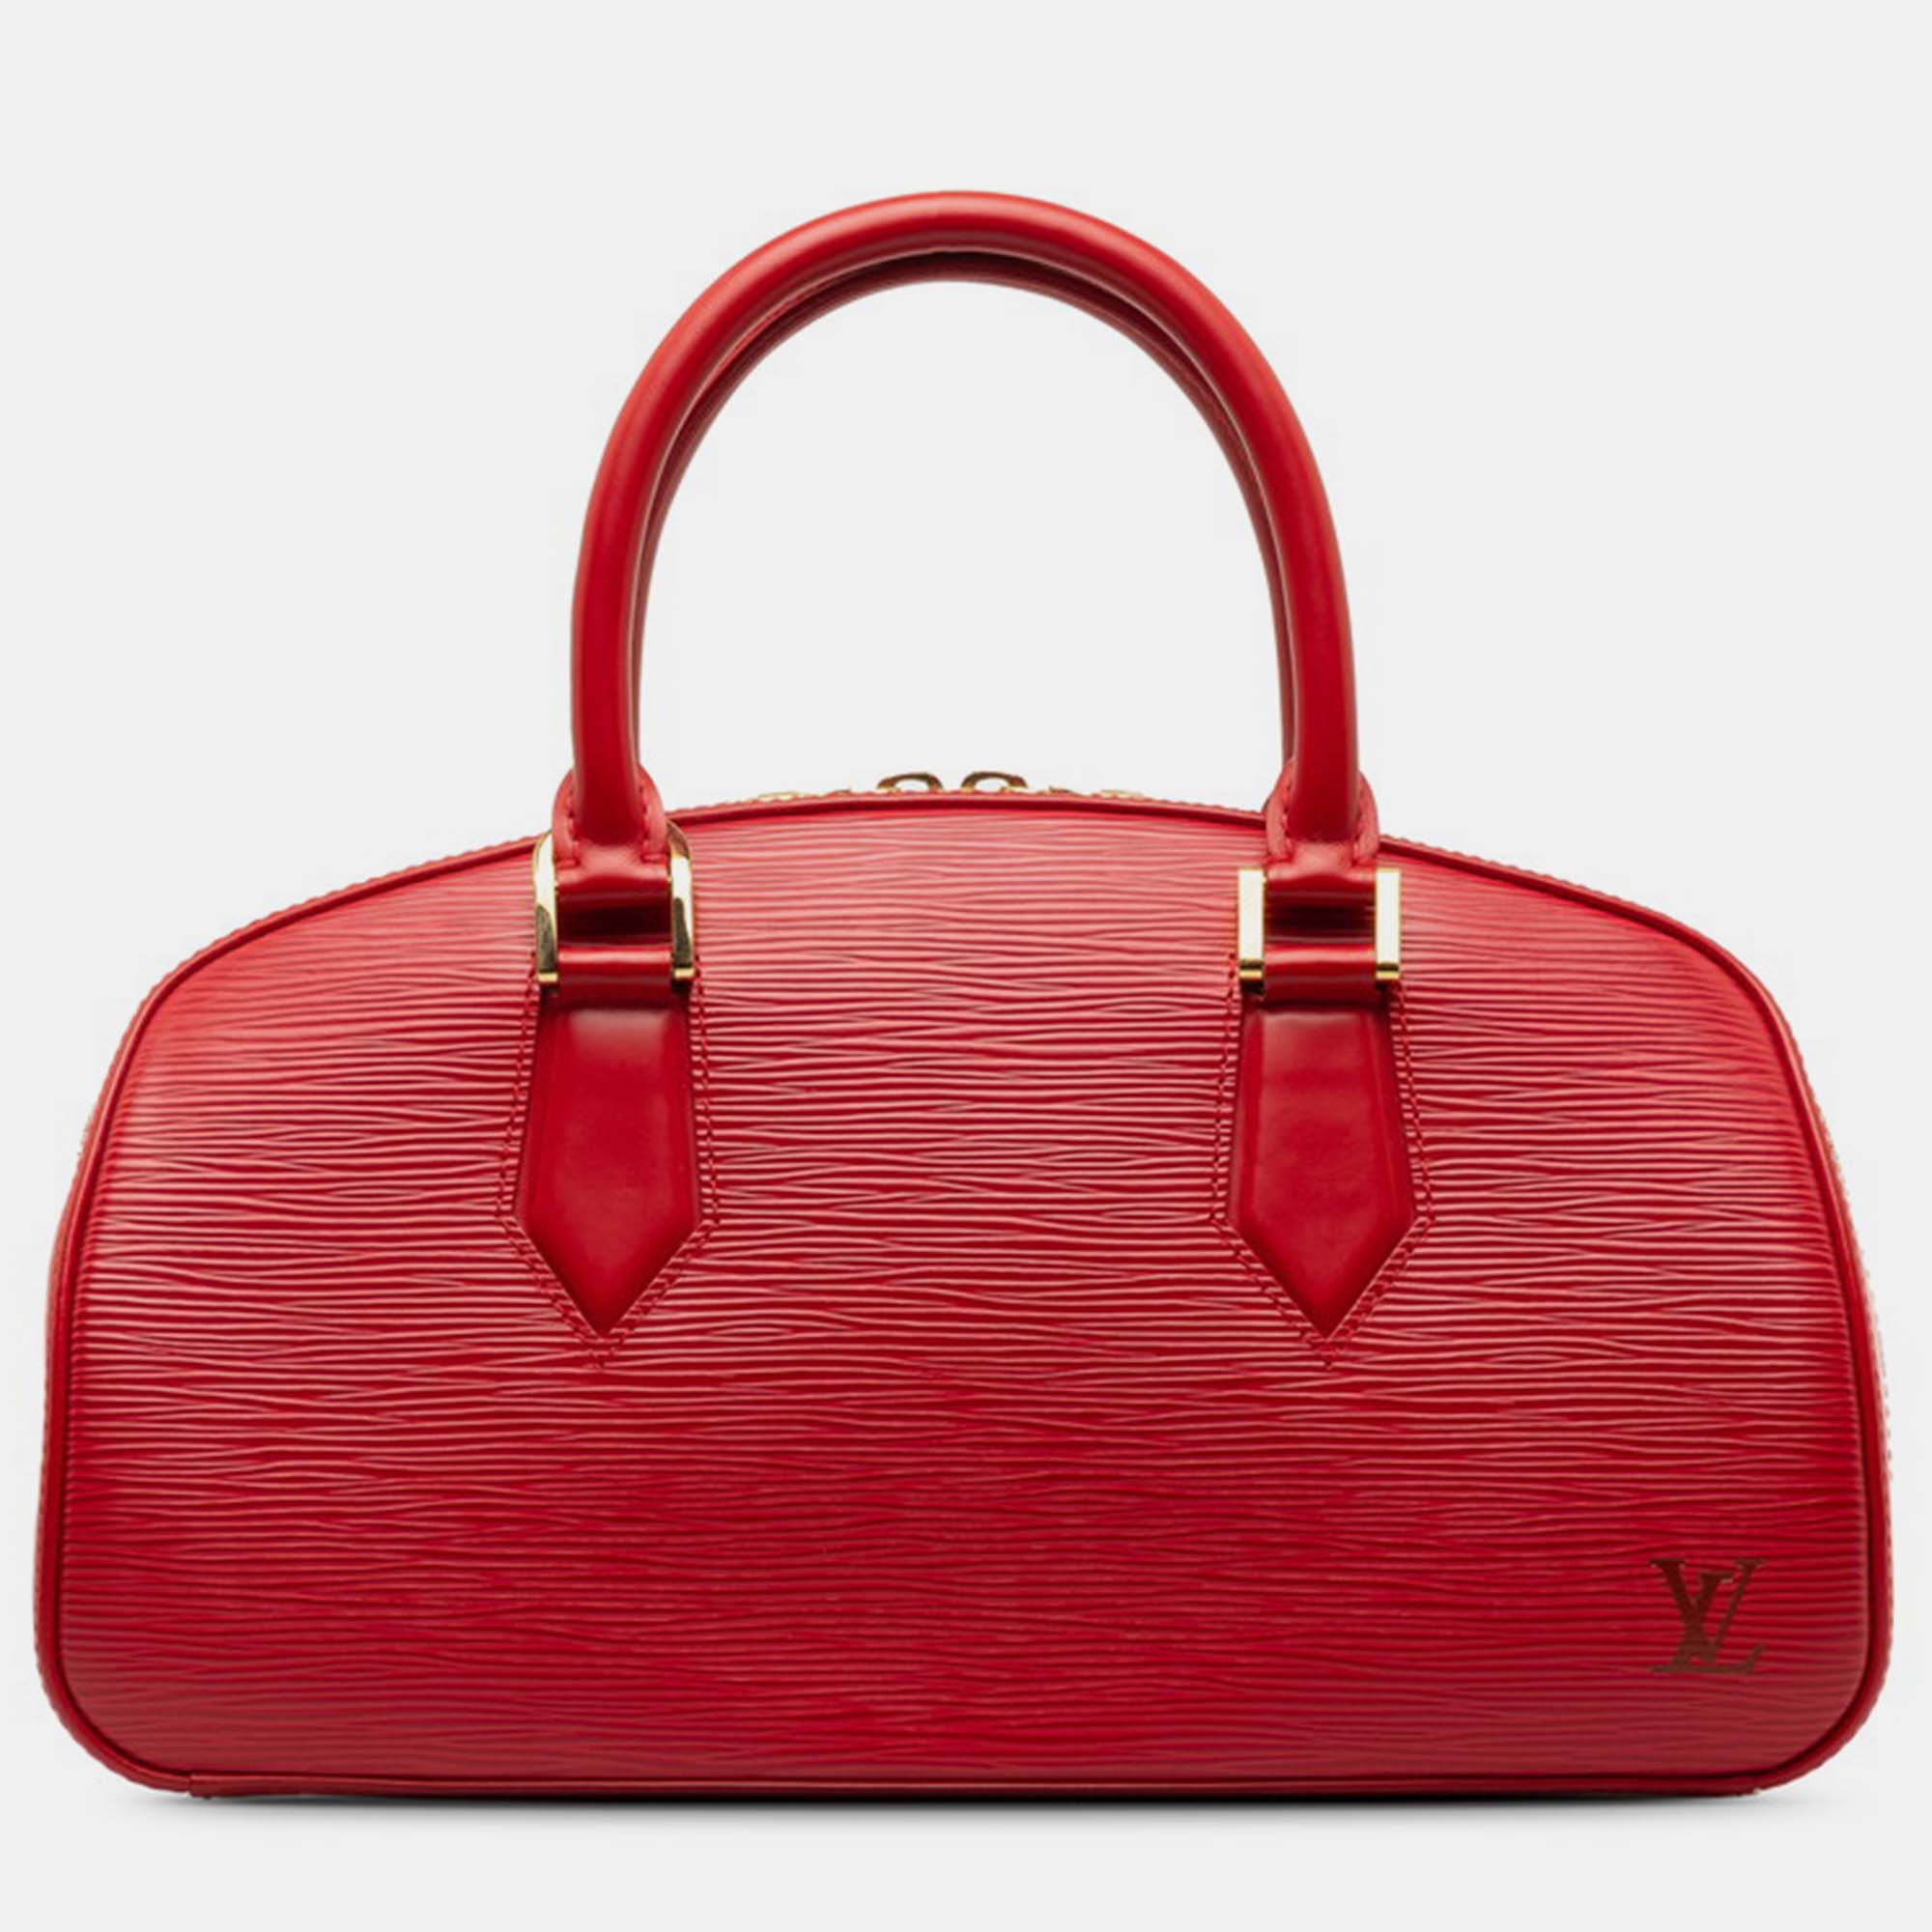 Louis vuitton red leather jasmin top handle bag